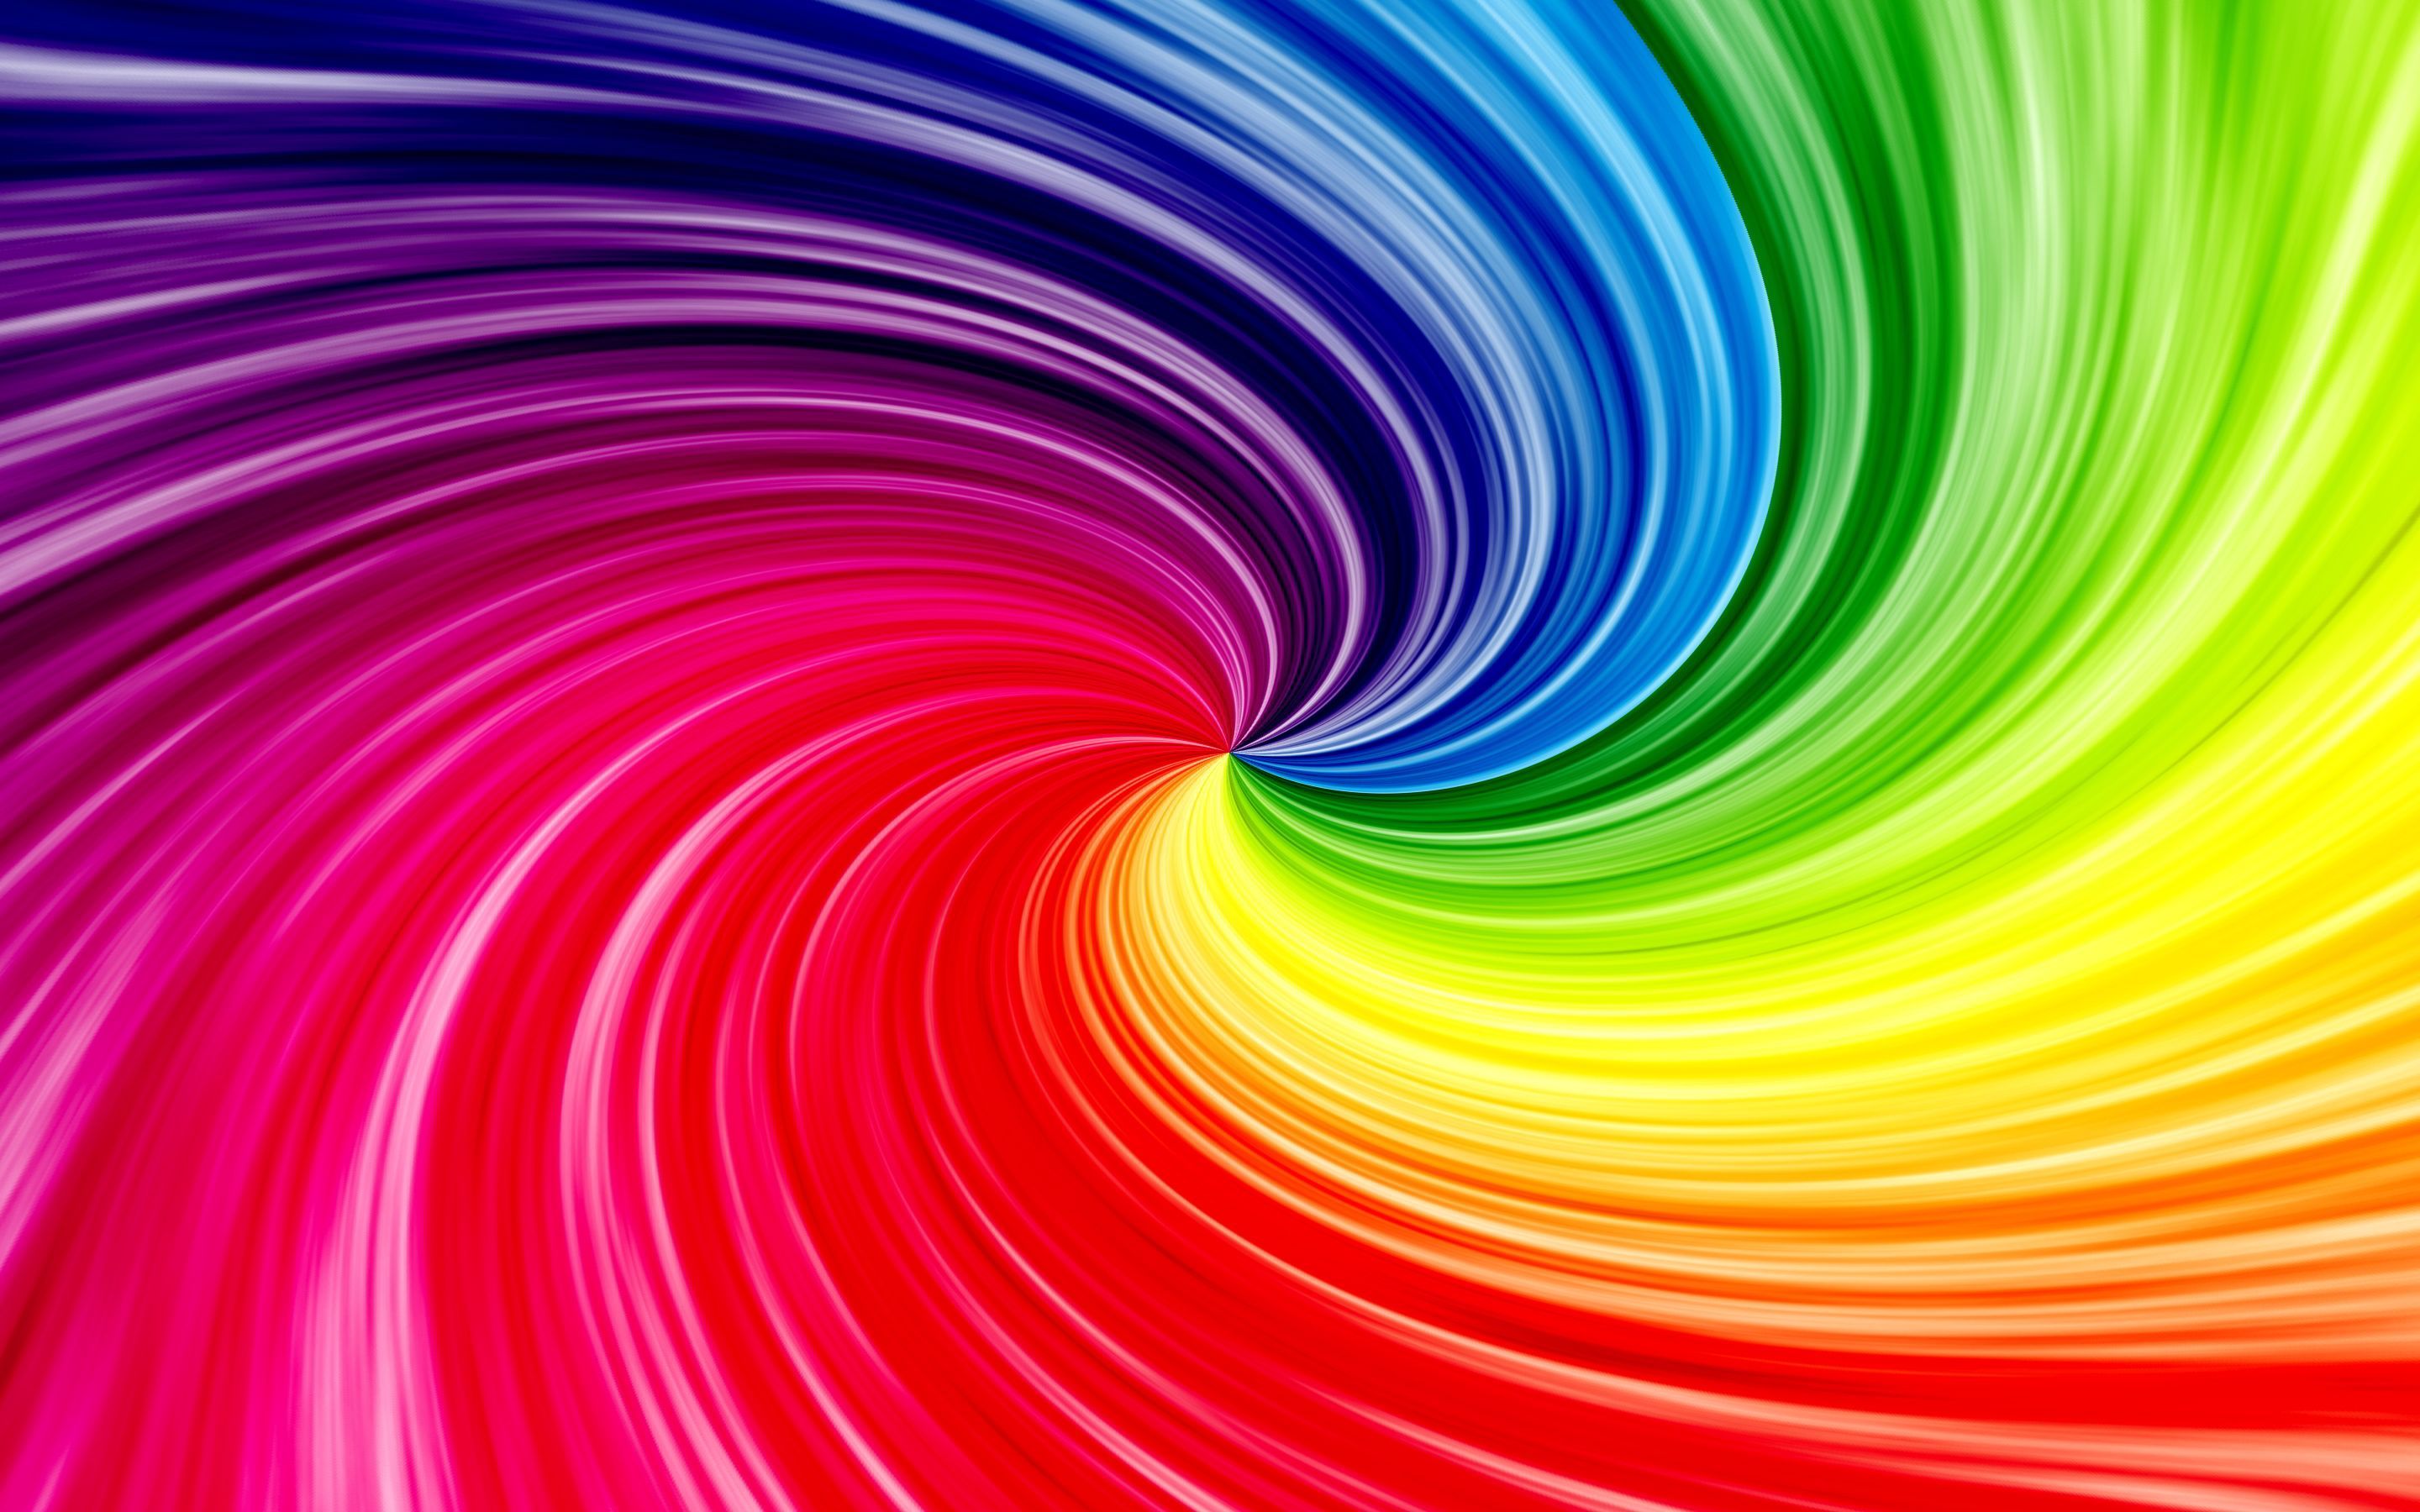 3D colorful wallpaper Wallpaper Wallpaper. Colorful wallpaper, Abstract, Rainbow colors